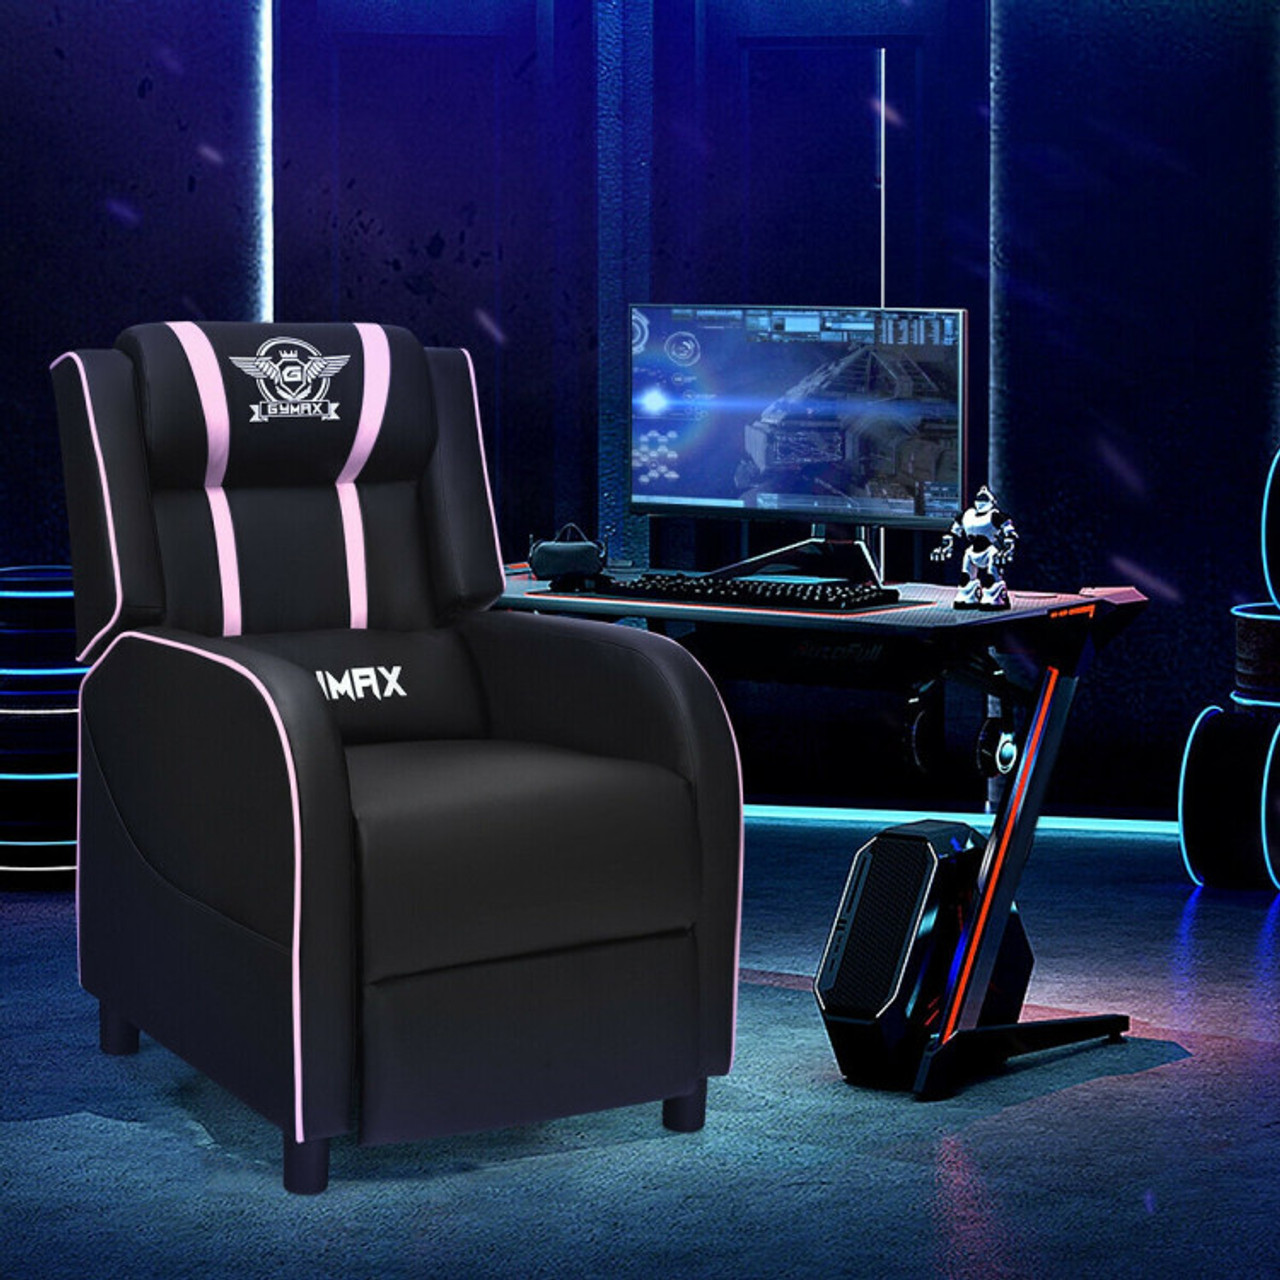 Massage Gaming Recliner PU Leather Chair with Footrest & Remote product image